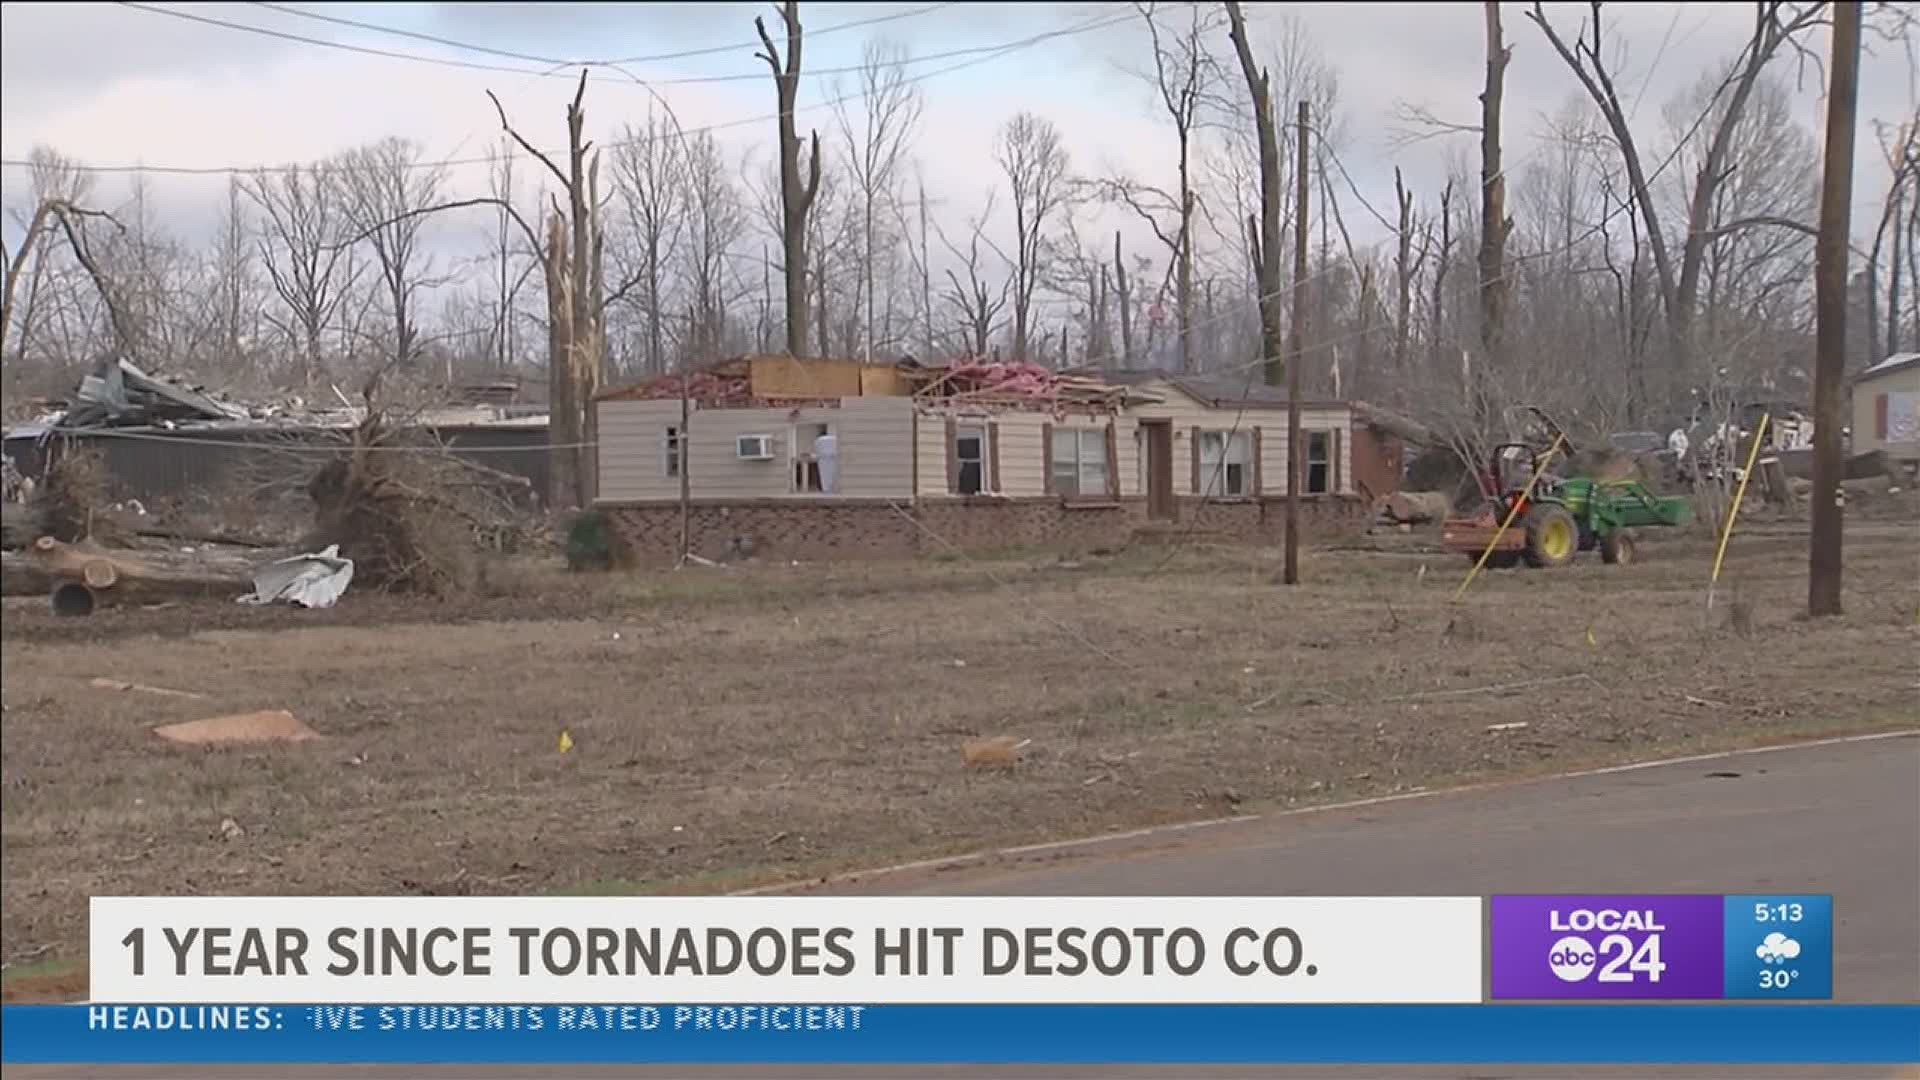 One year ago today, an EF2 tornado tore through DeSoto County. Now, people are still recovering emotionally and physically from the storm.